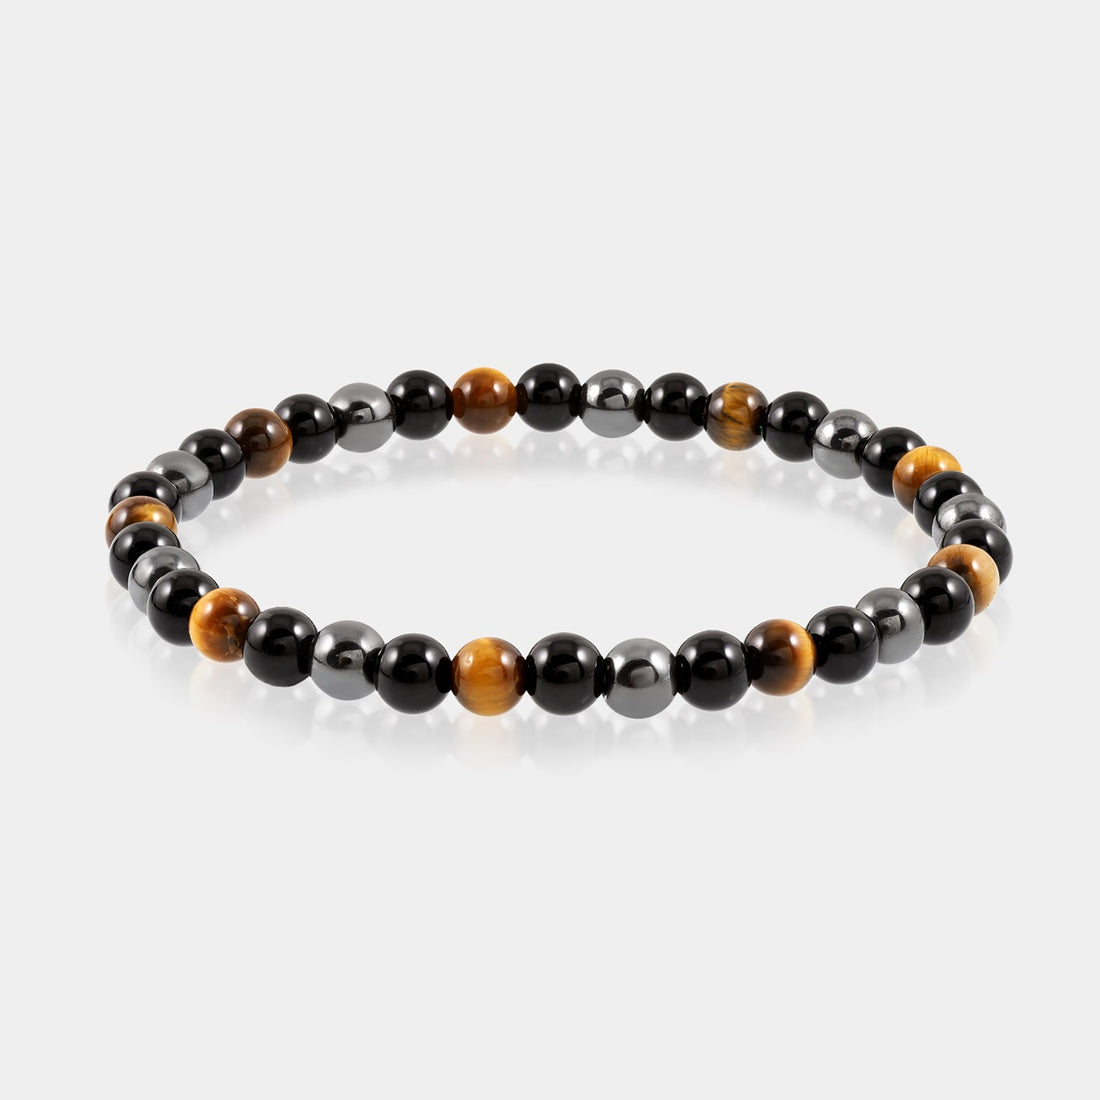 Stylish Triple Protection Stretch Bracelet featuring 6mm and 8mm smooth round beads of Golden Tiger's Eye, Black Onyx, and Hematite.